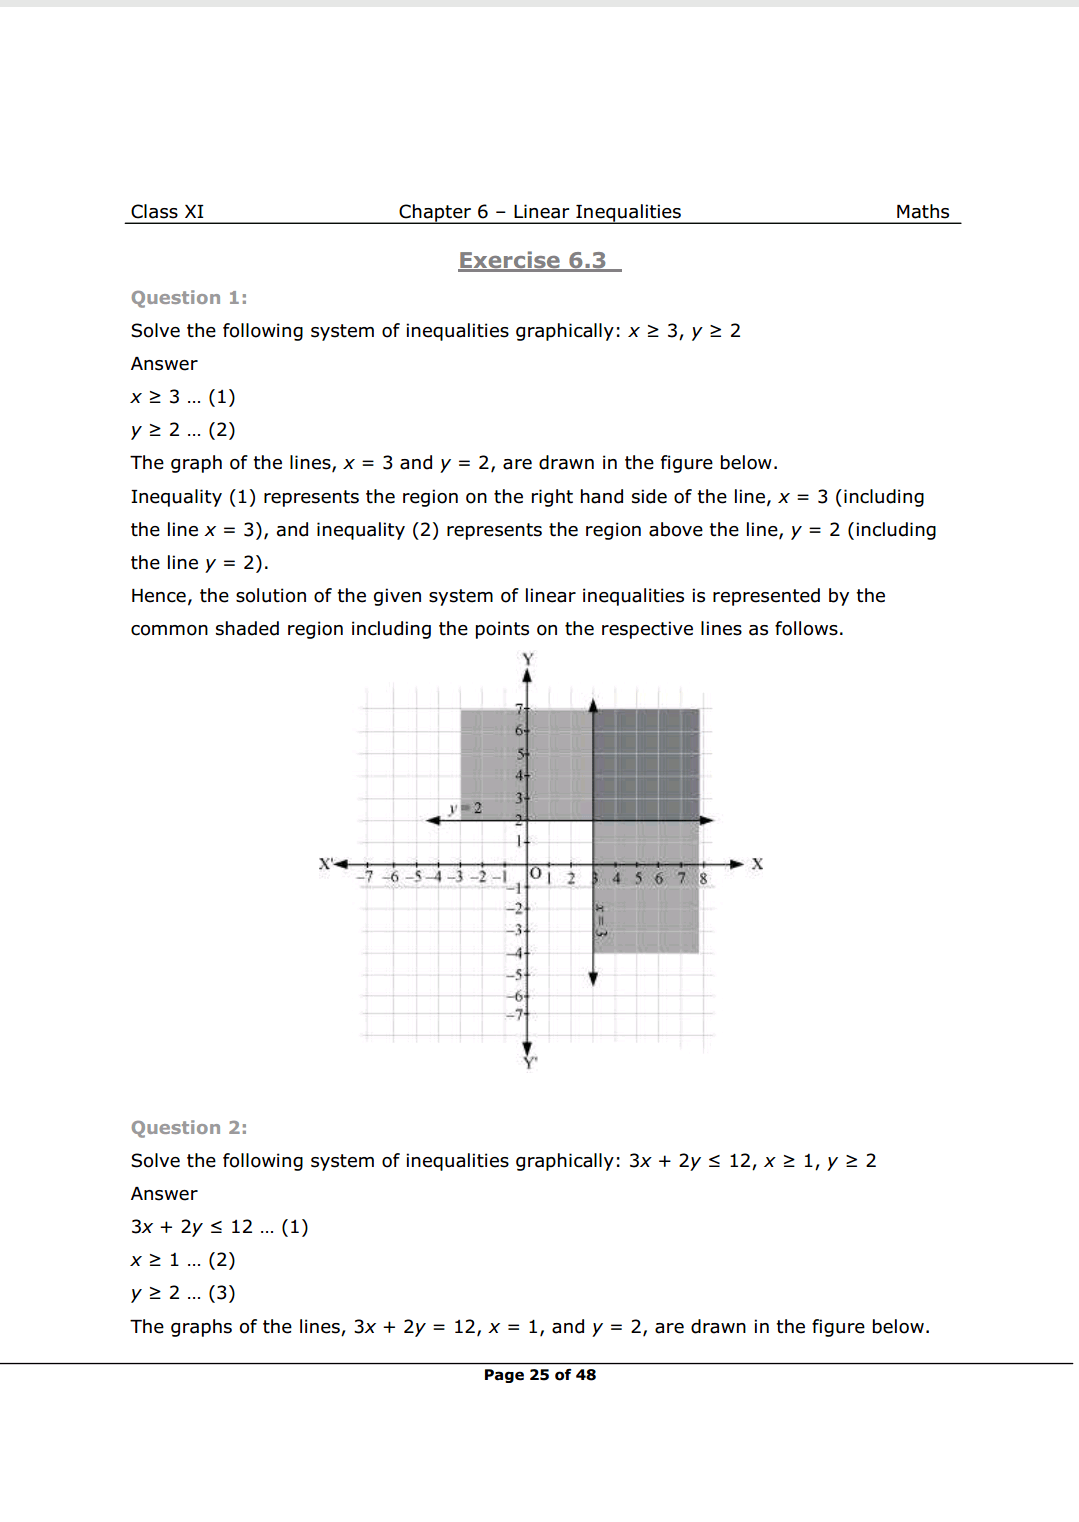 Class 11 Maths Chapter 6 Exercise 6.3 Solutions image 1